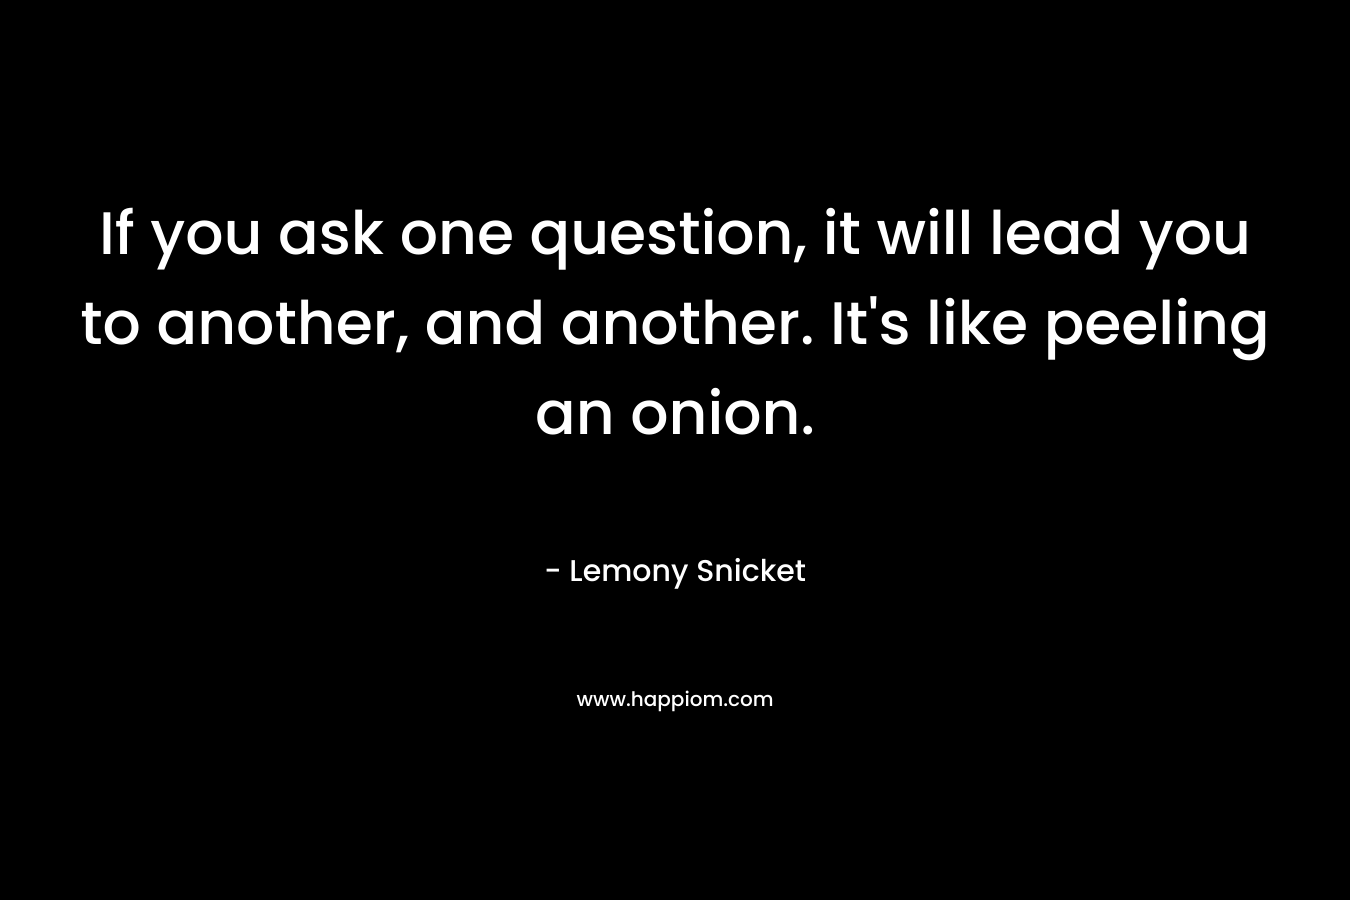 If you ask one question, it will lead you to another, and another. It’s like peeling an onion. – Lemony Snicket